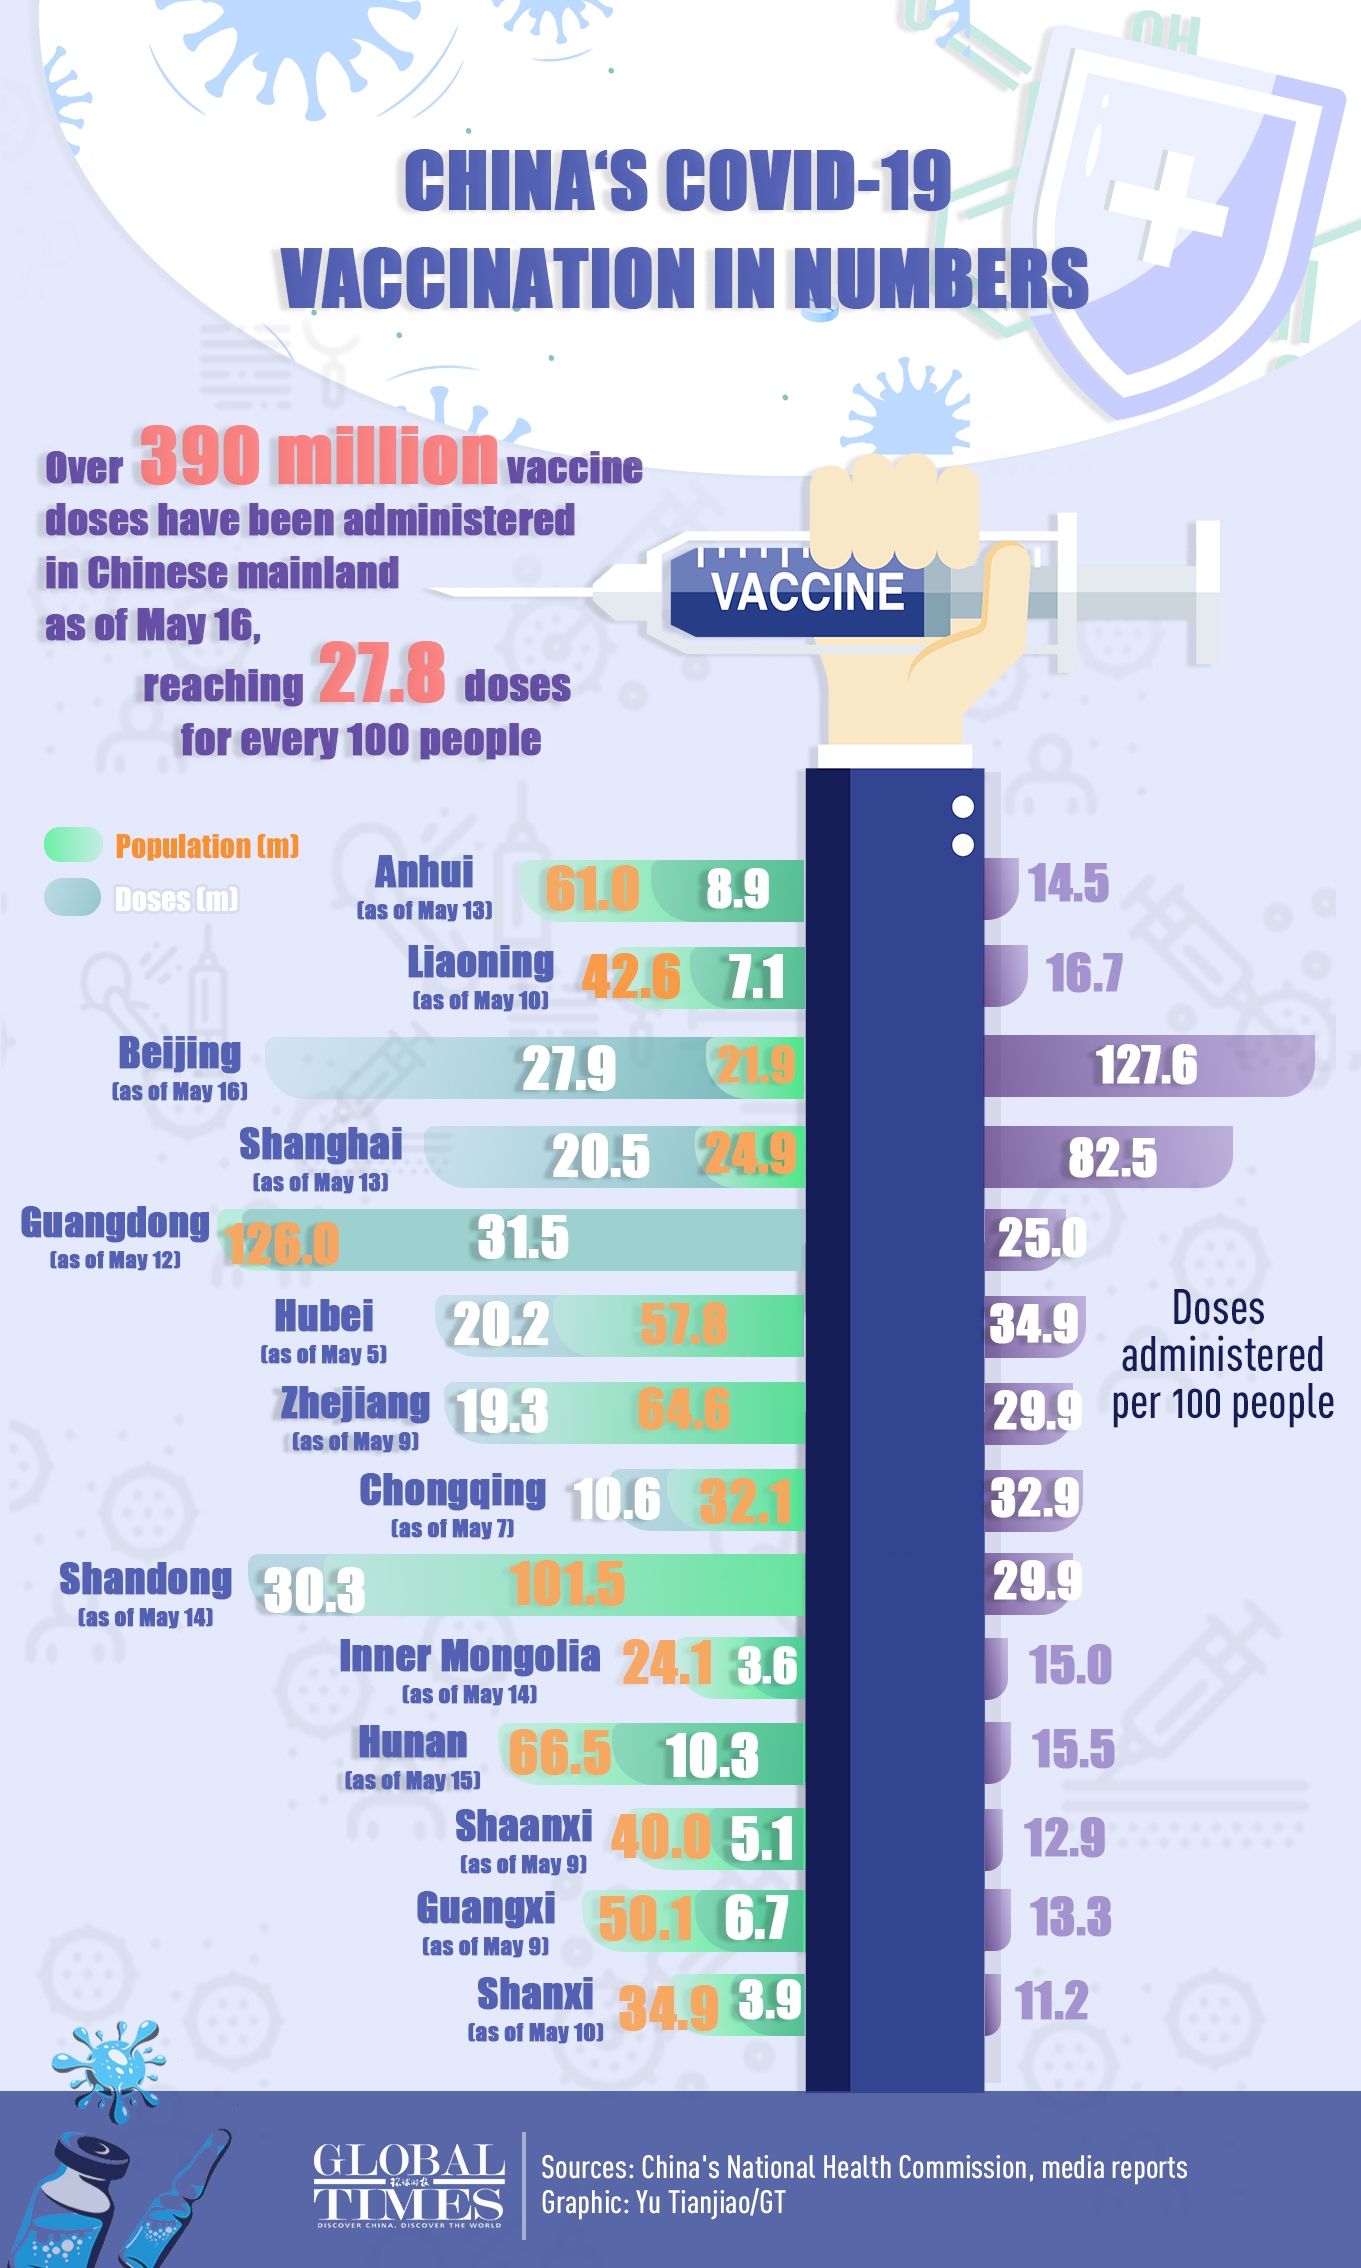 More than 390 million vaccine doses have been administered in China as of May 16 reaching27.8 doses for every 100 people. Take a look at vaccination numbers in China’s provinces.